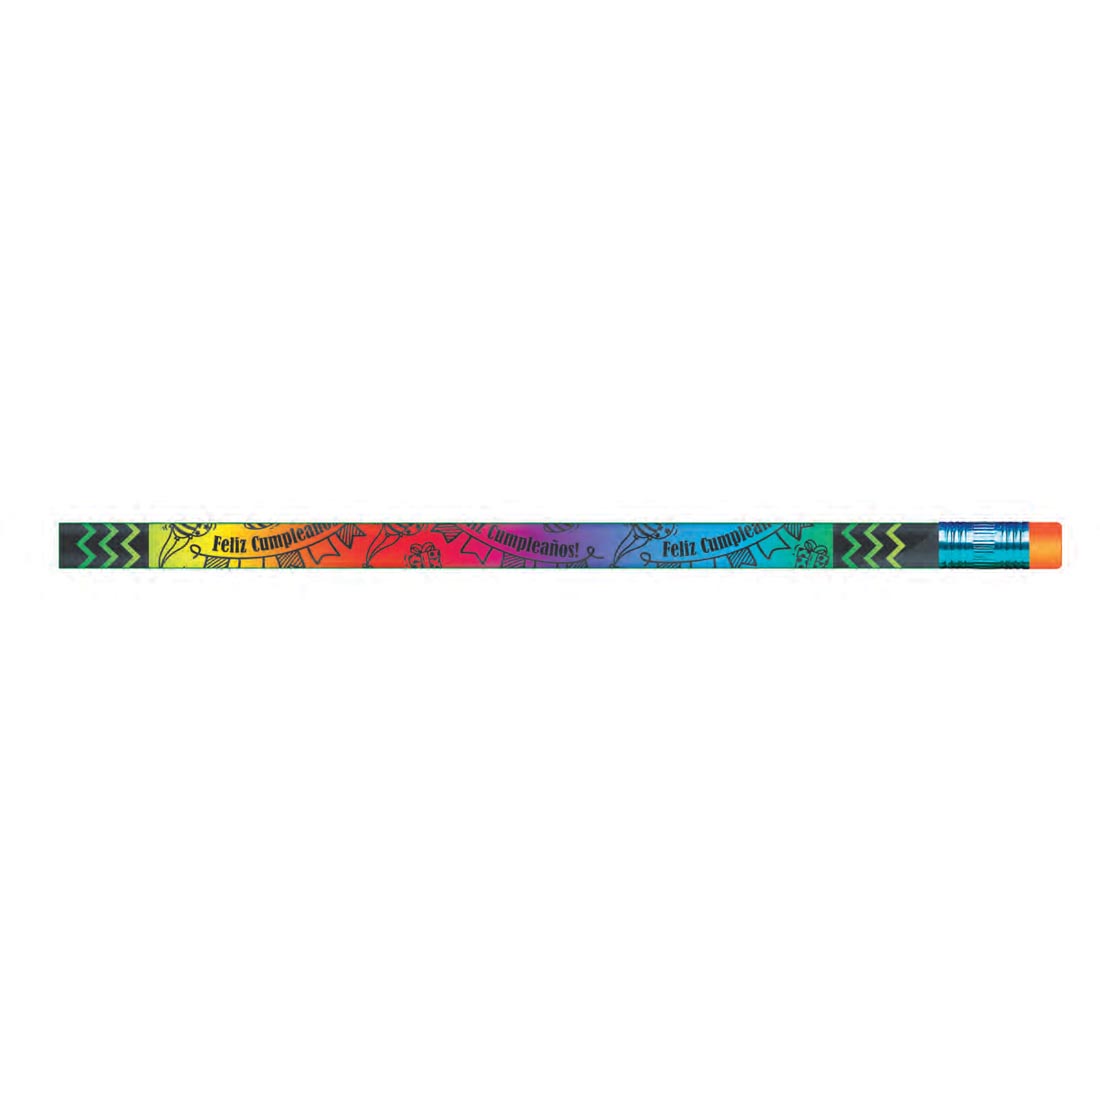 Standard pencil with Feliz Cumpleanos and pennant banners on a rainbow background